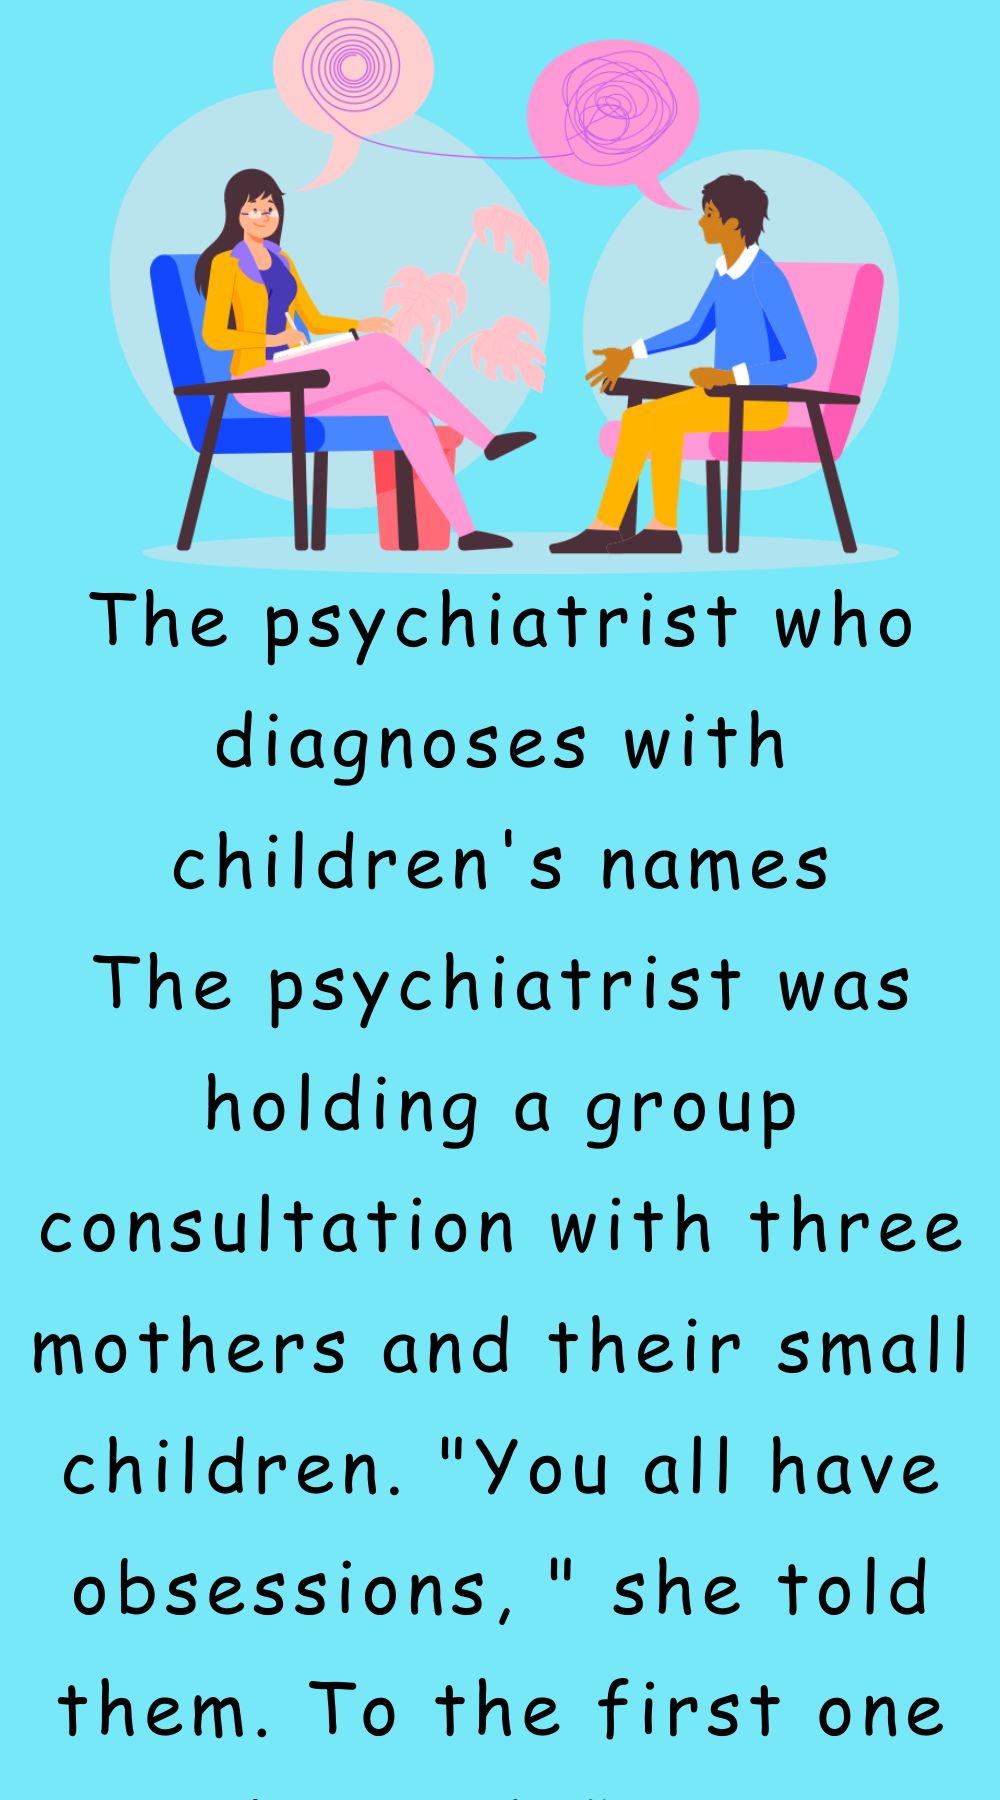 The psychiatrist who diagnoses with childrens